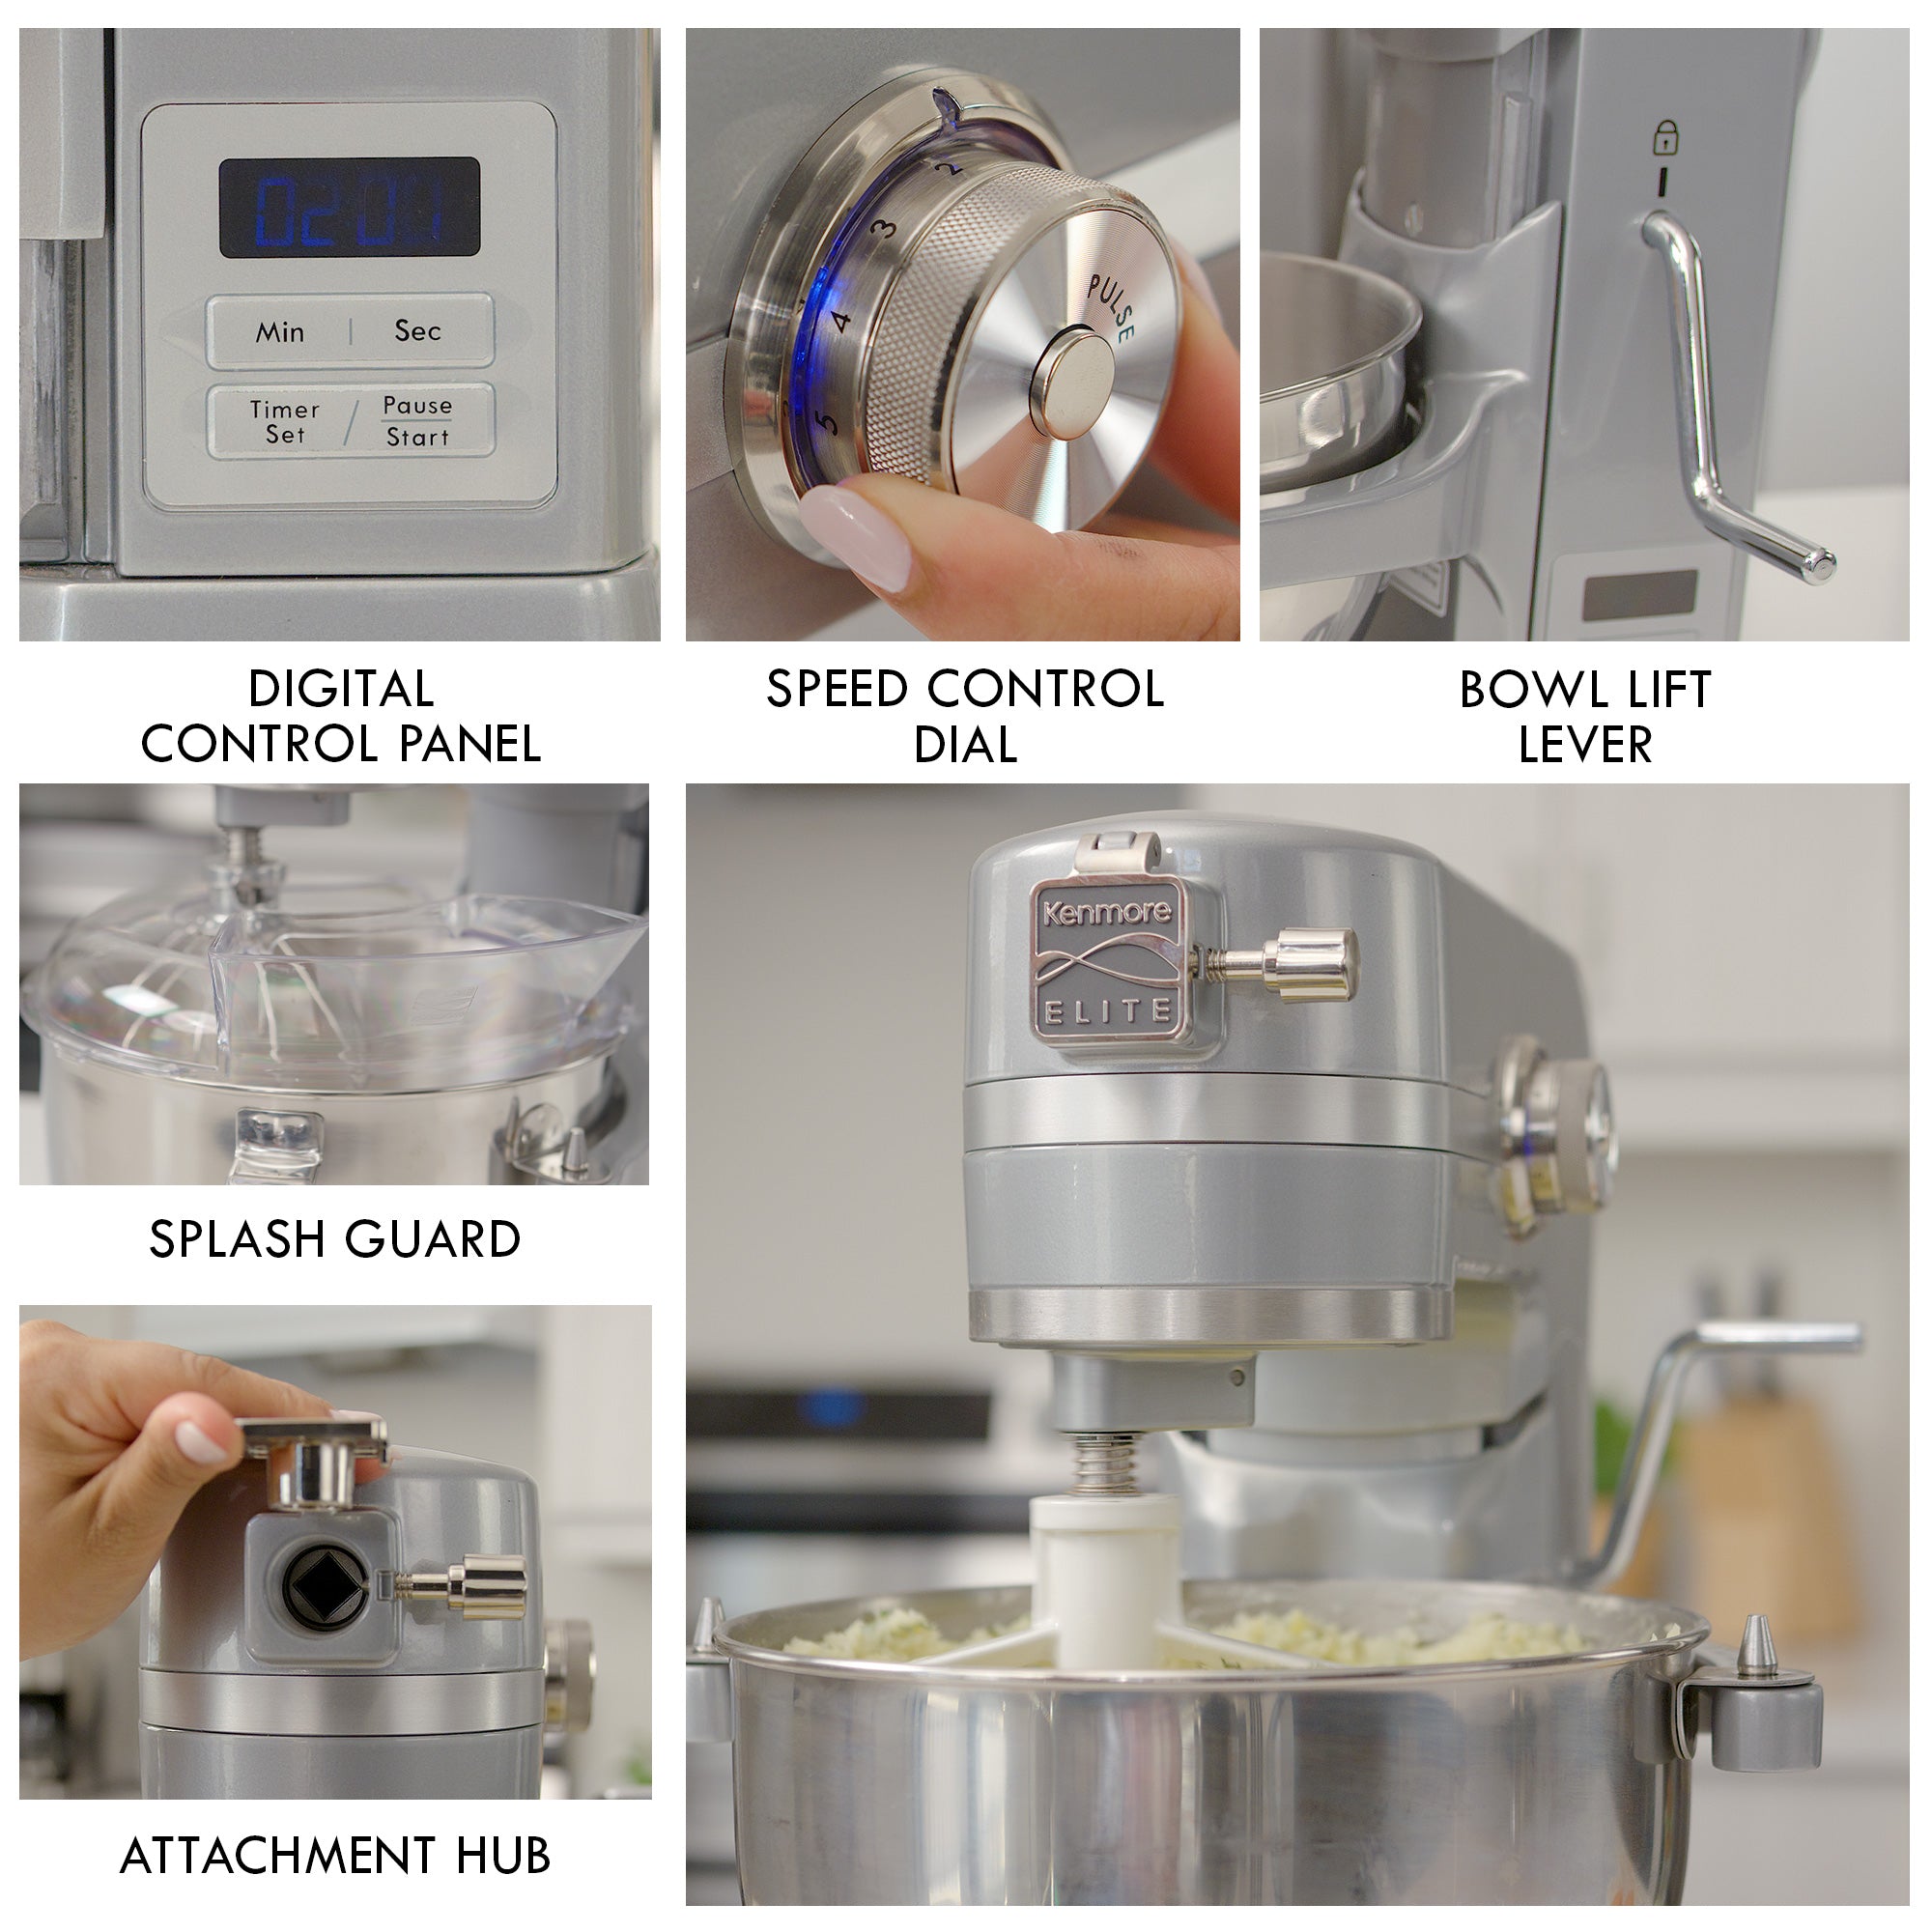 Closeup image of Kenmore 6 qt stand mixer with whipping cream in mixing bowl, surrounded by close up images of parts, labeled: Digital control panel; speed control dial; bowl lift lever; splash guard; attachment hub